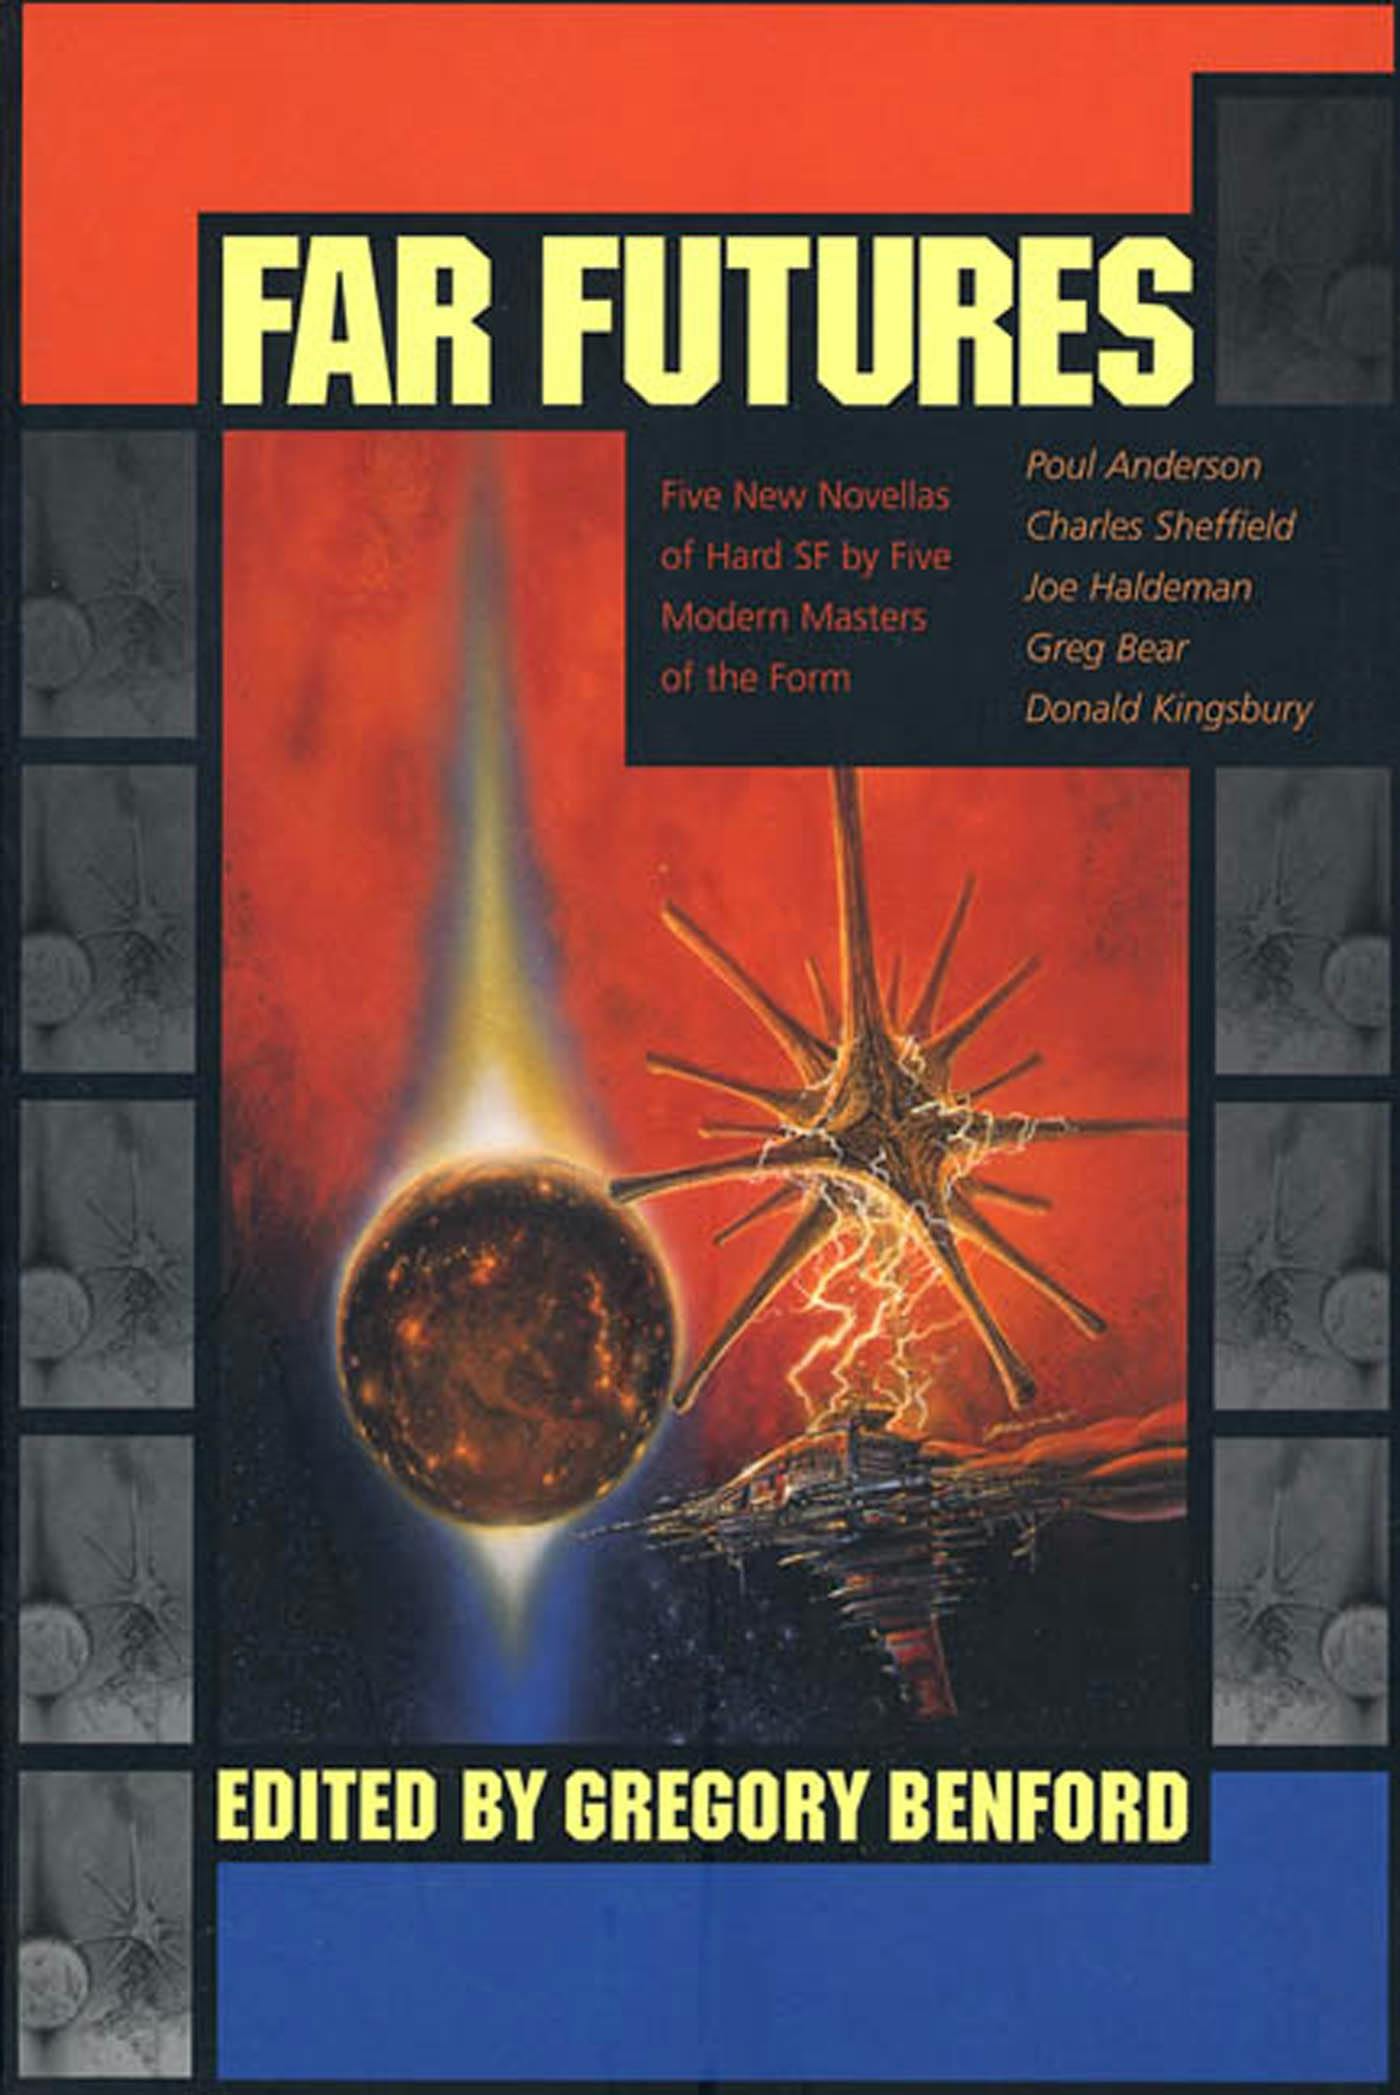 Cover for the book titled as: Far Futures